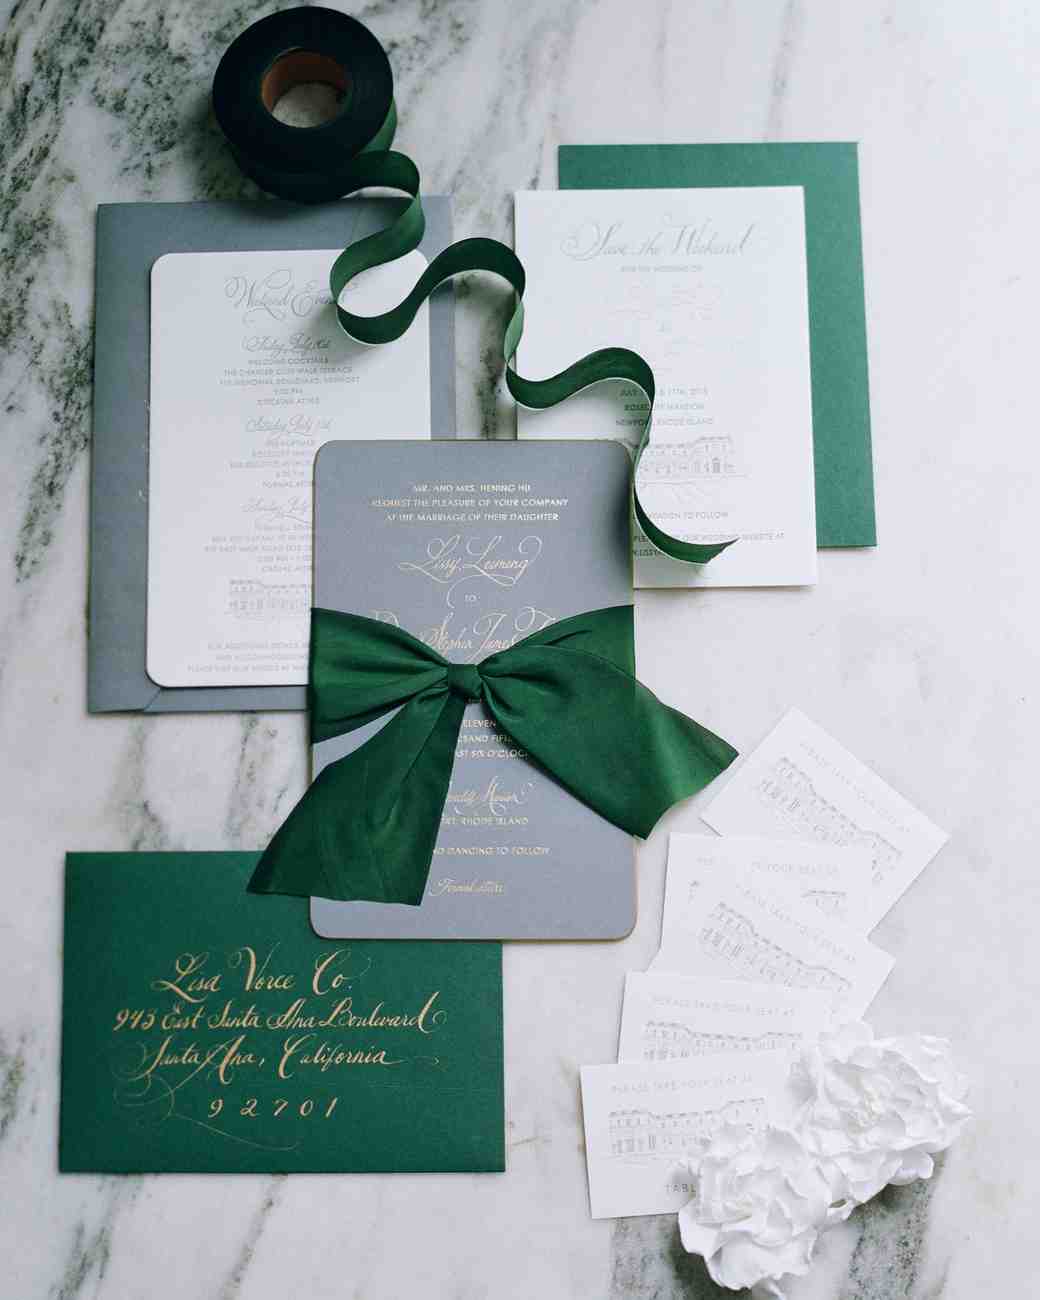 Invitation suite with winter wedding colors green details on marble table